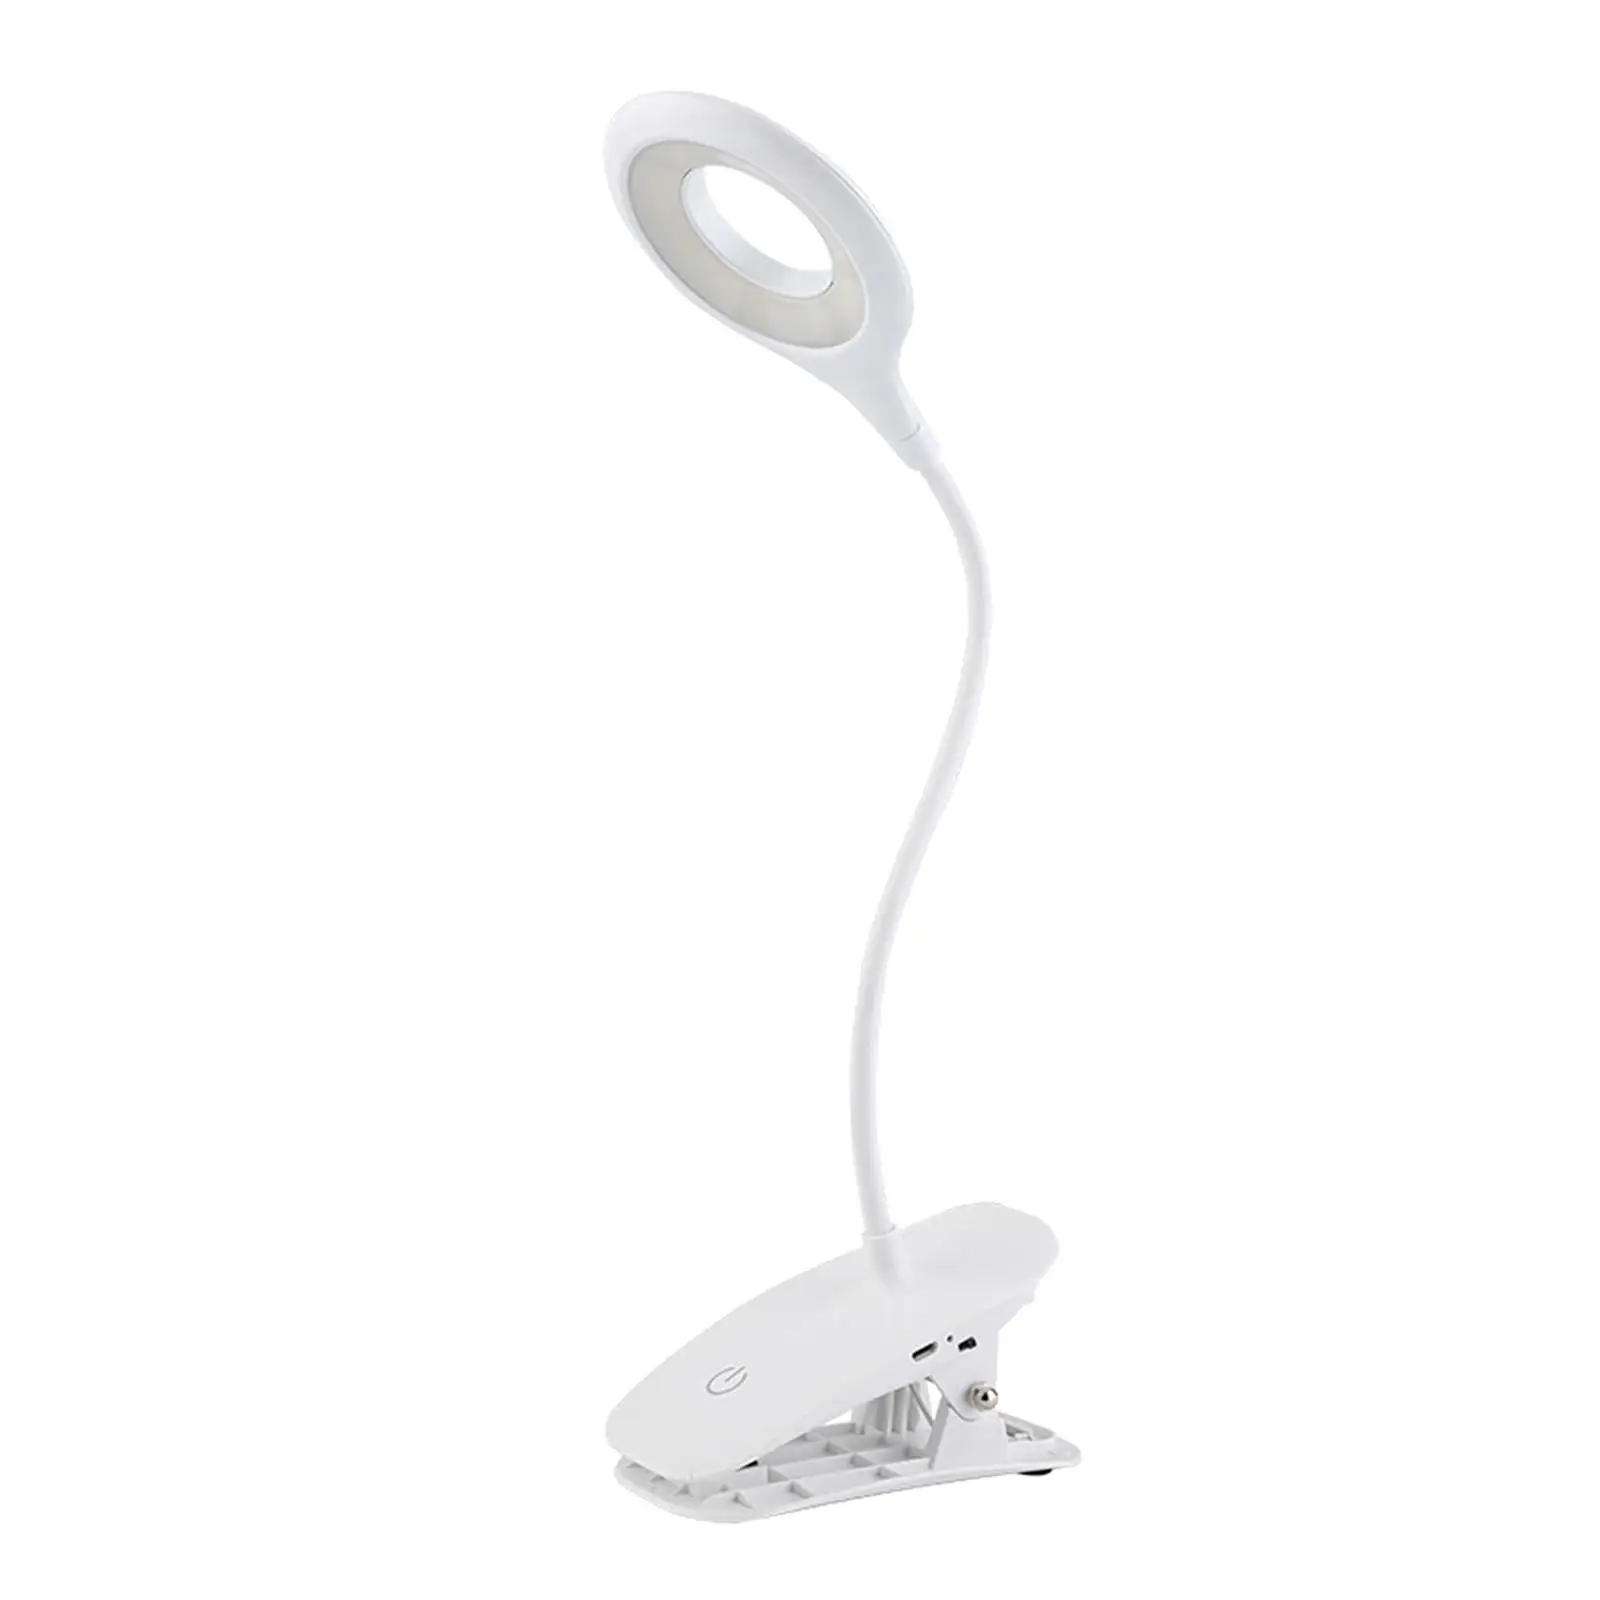 LED Reading Light with Clip - USB Rechargeable s , 20 LEDs Flexible Neck  Lamp,  Clamp Desk Lamps for Bed Headboard